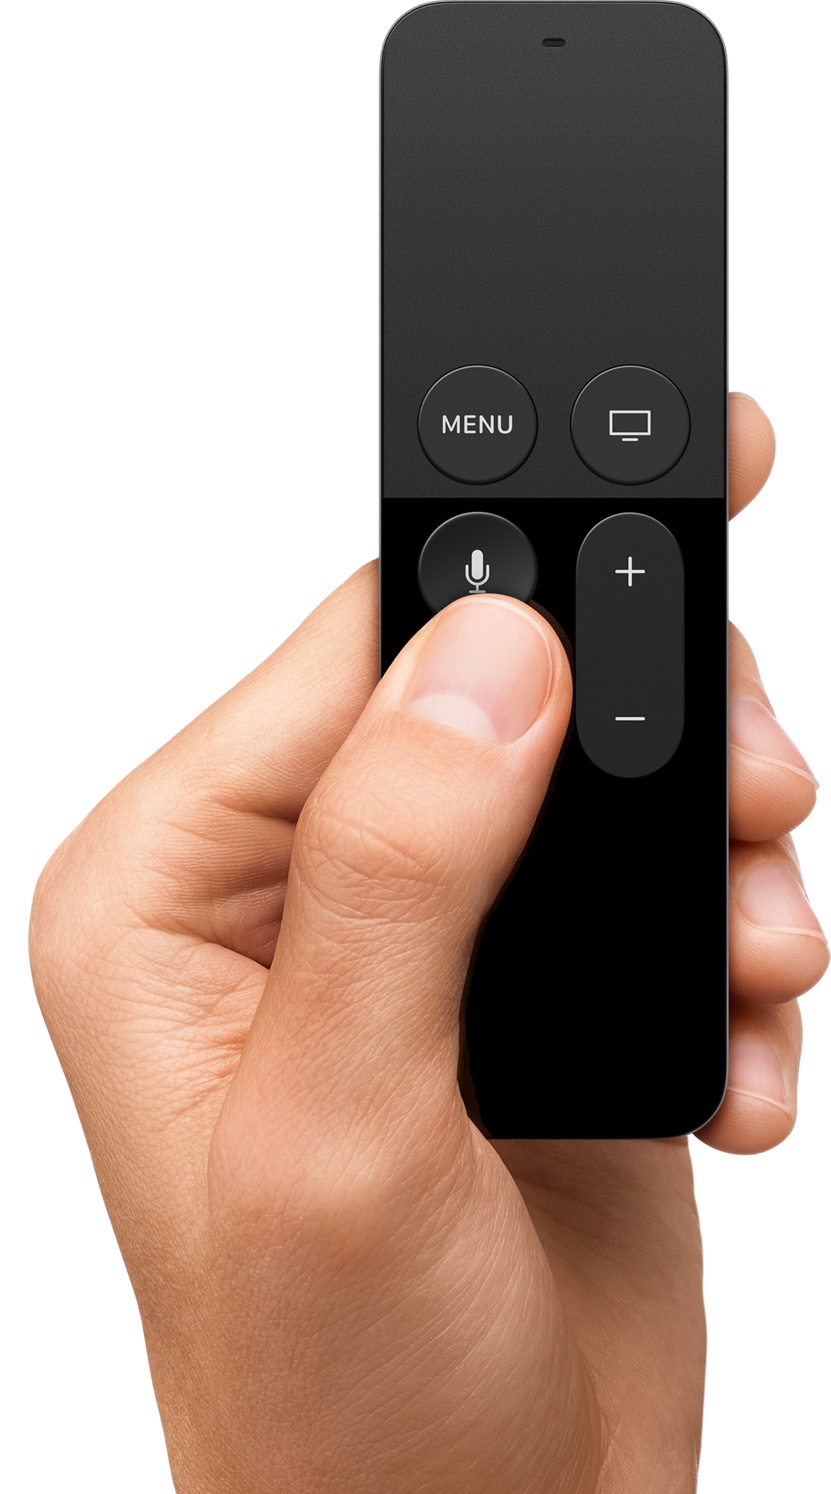 Apple TV 4 remote in hand image 002